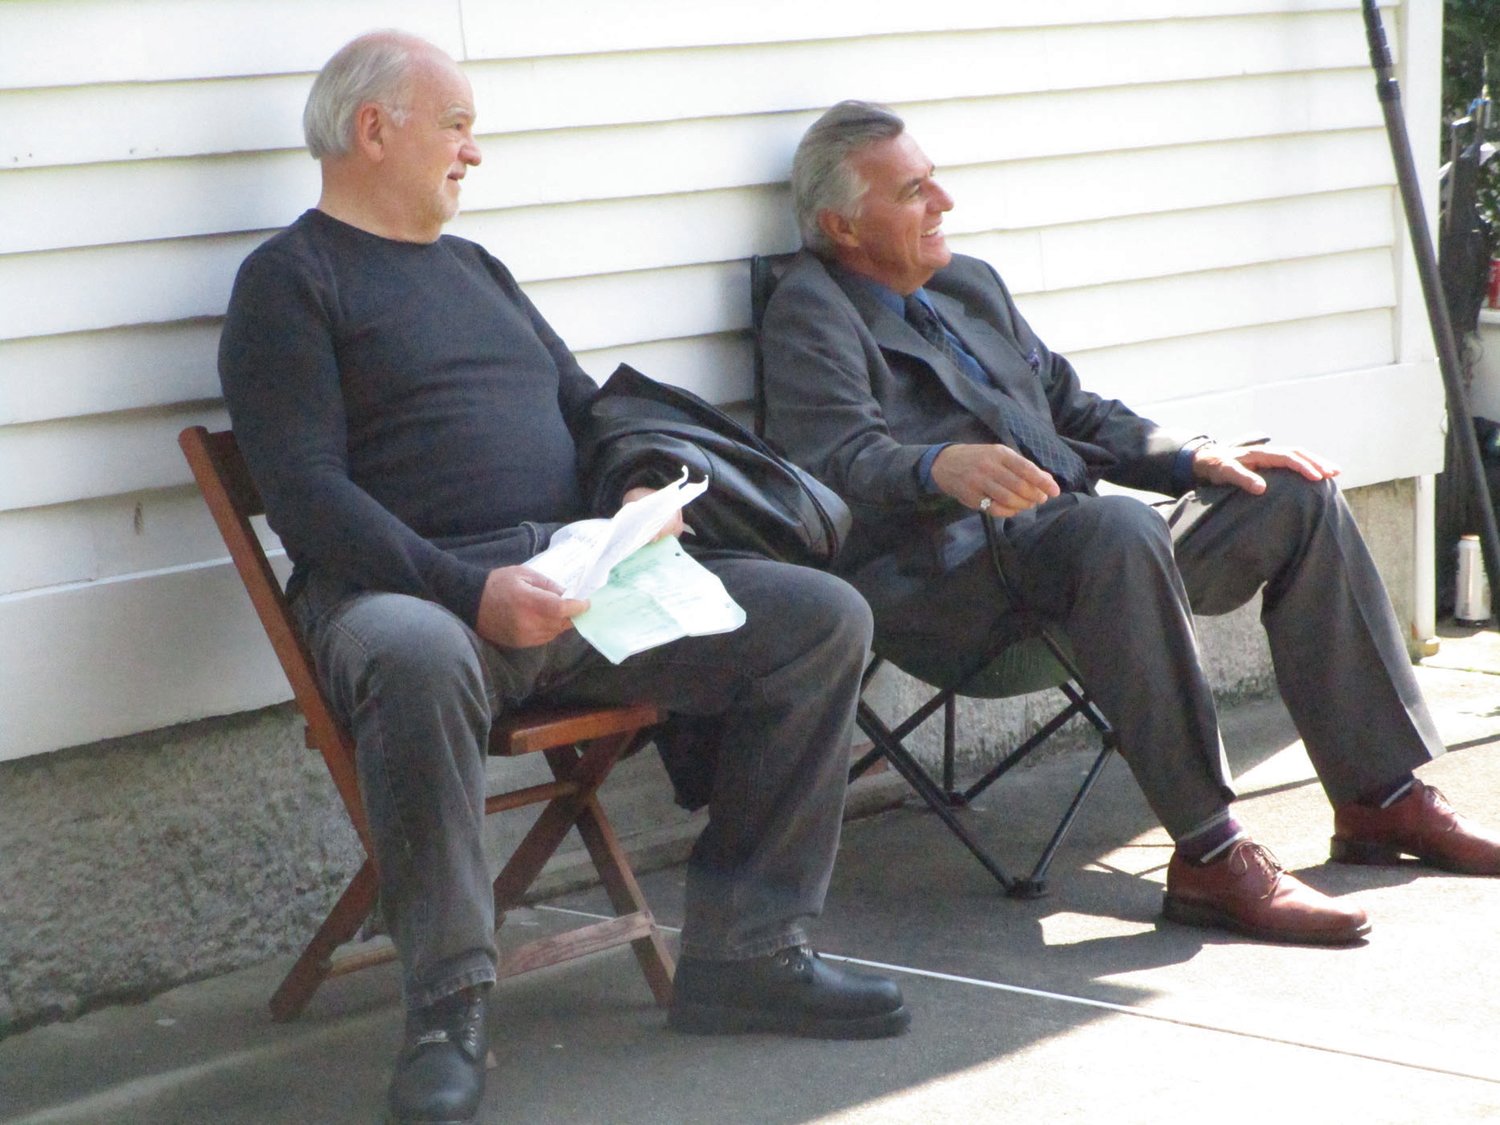 FILM VETERANS: Richard Riehle, left, and Stephen O’Neil Martin share a lighter moment while preparing for the start of filming on Saturday.